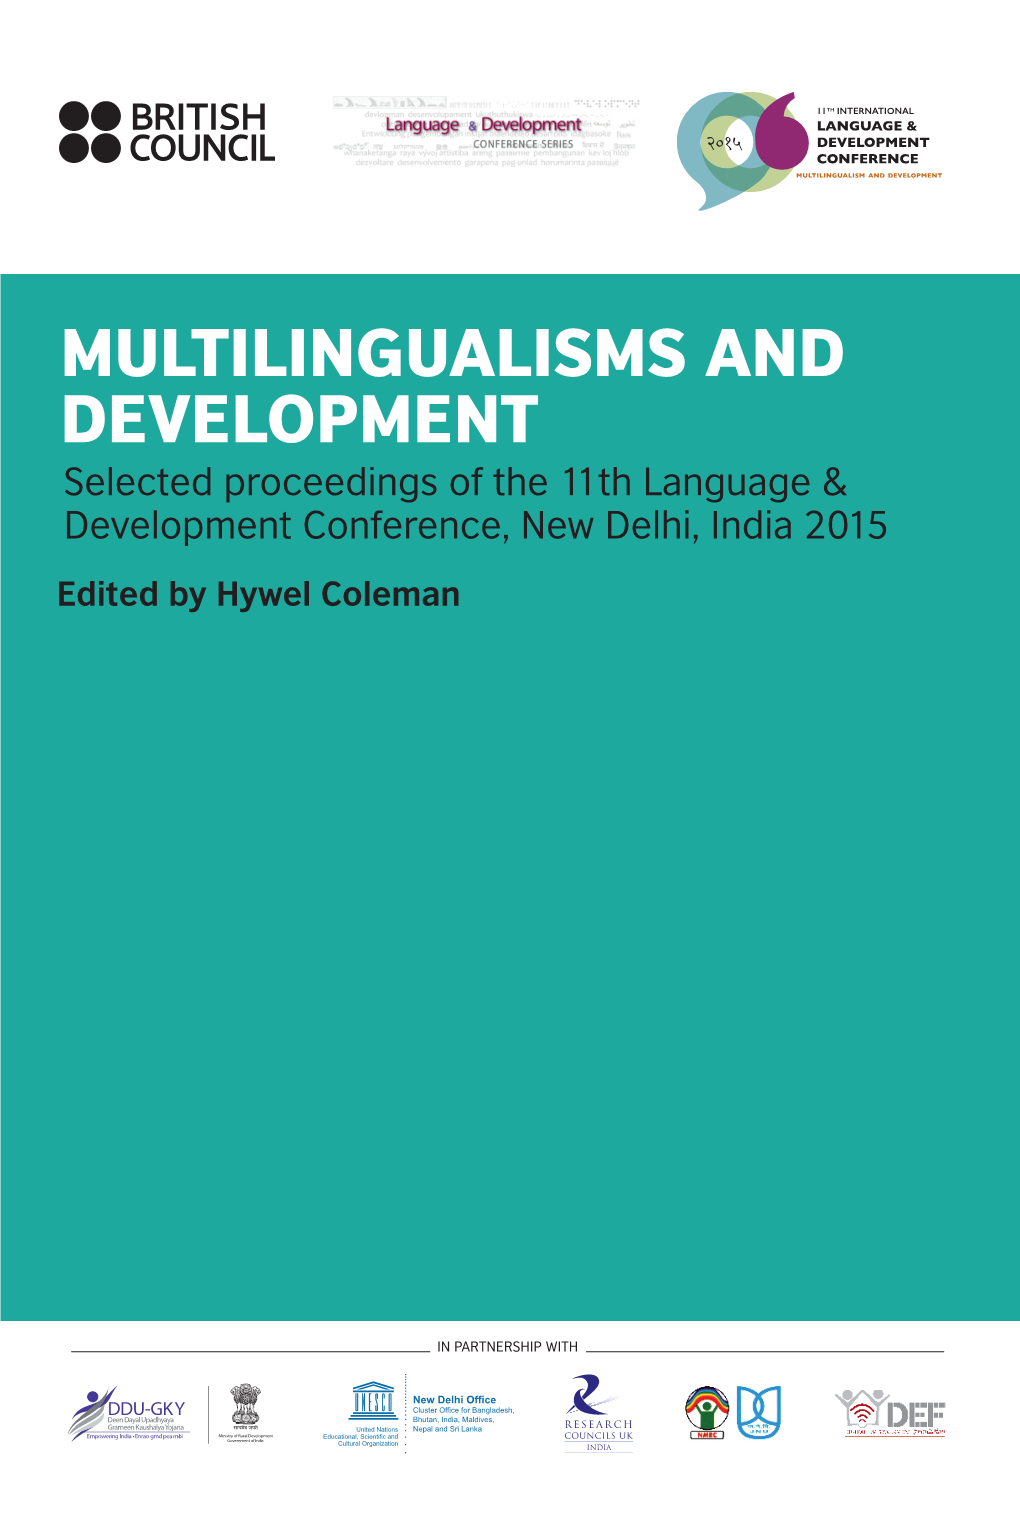 Multilingualisms and Development Is the Latest in the Proceedings of the Ongoing Language & Development Conference Series